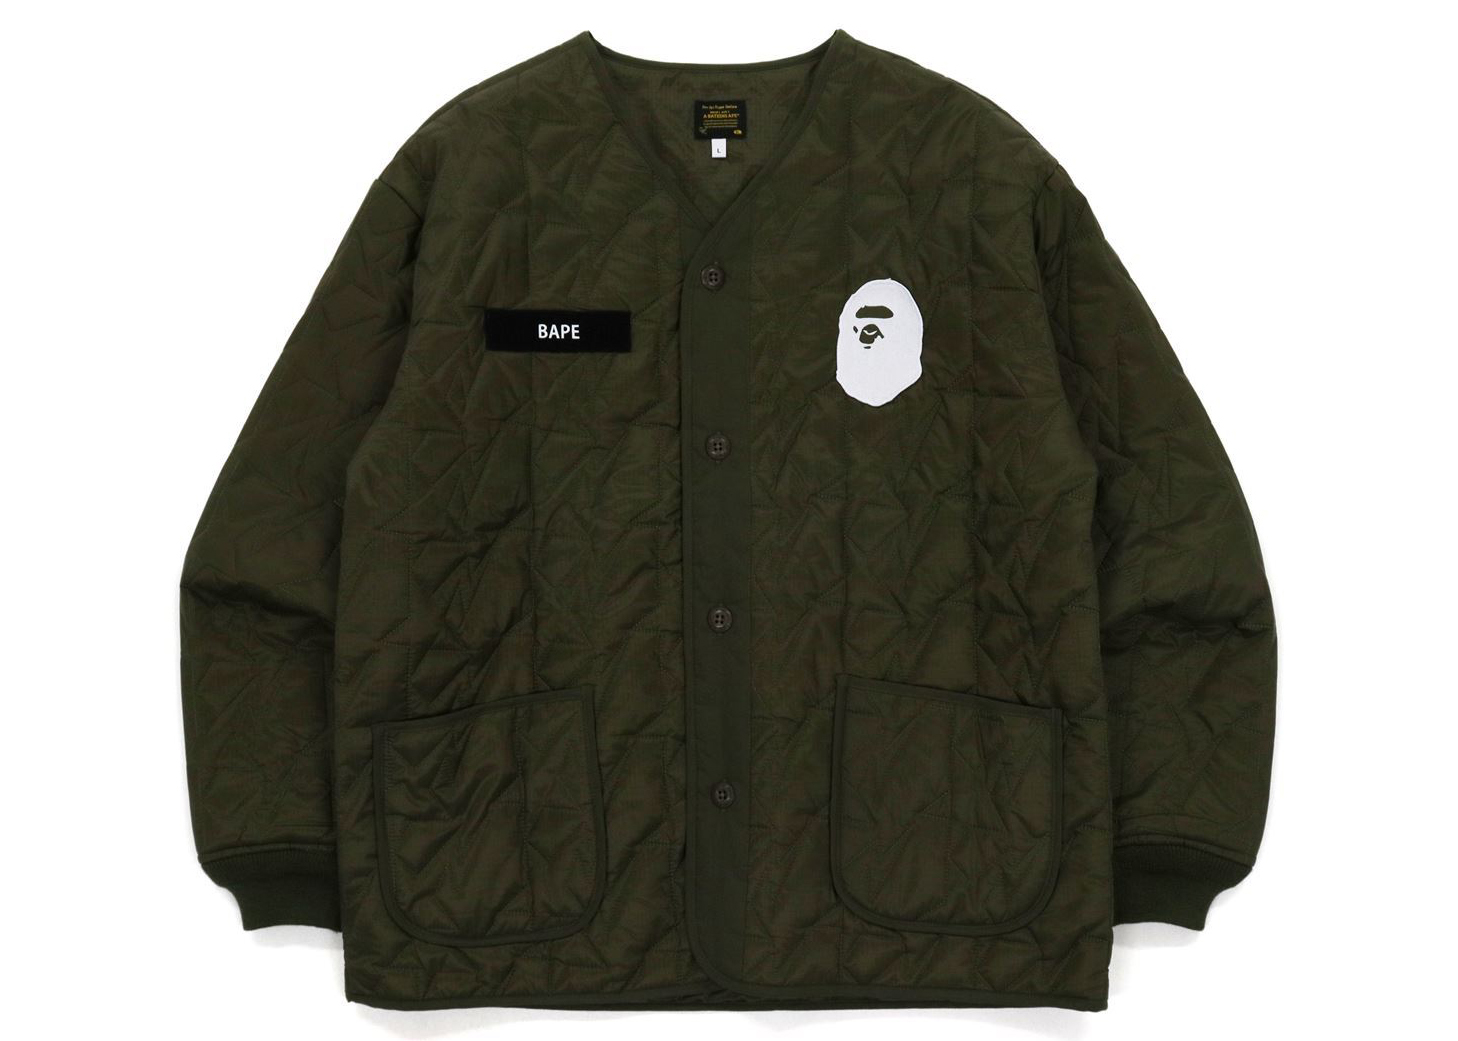 BAPE Military Patch Liner Jacket Olivedrab - FW21 - US